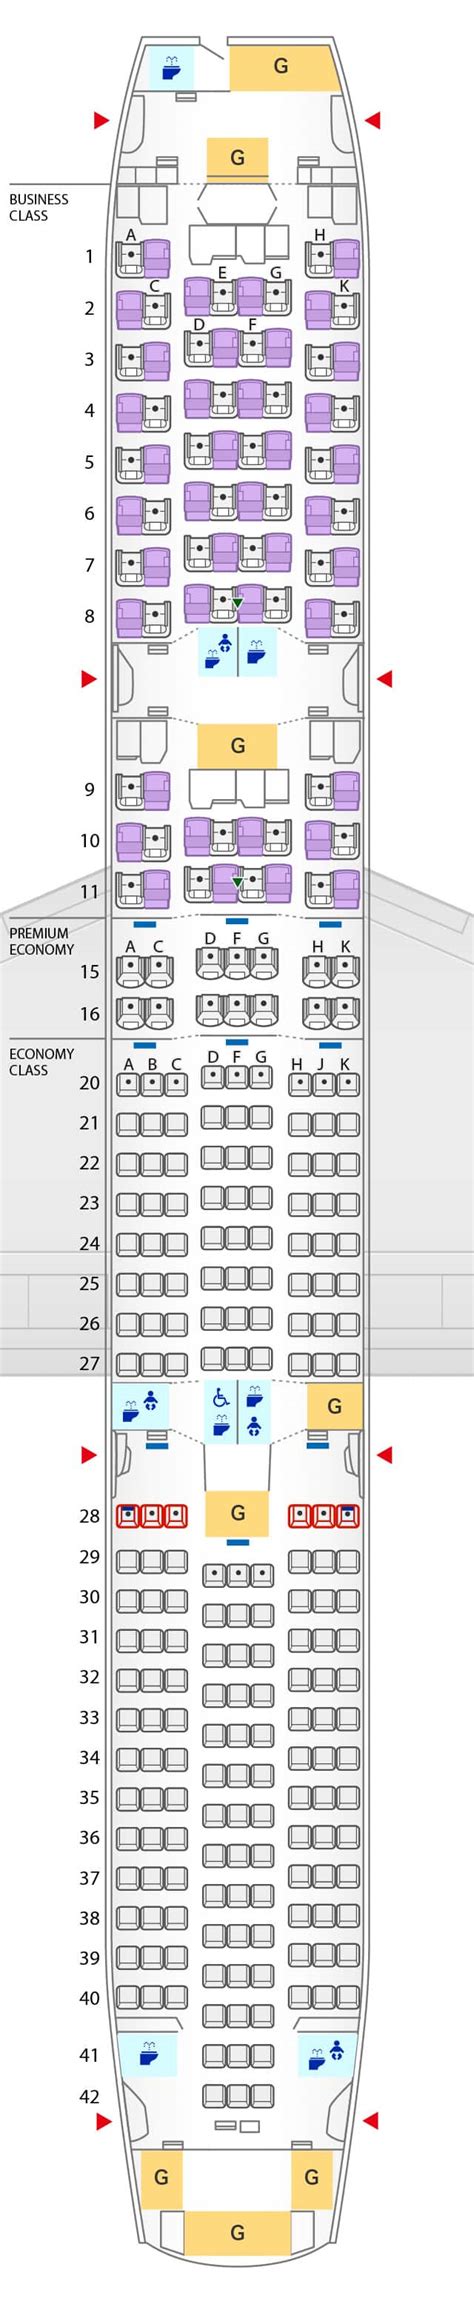 View the seat map and interior specifications of the Boeing 787-9 Dr